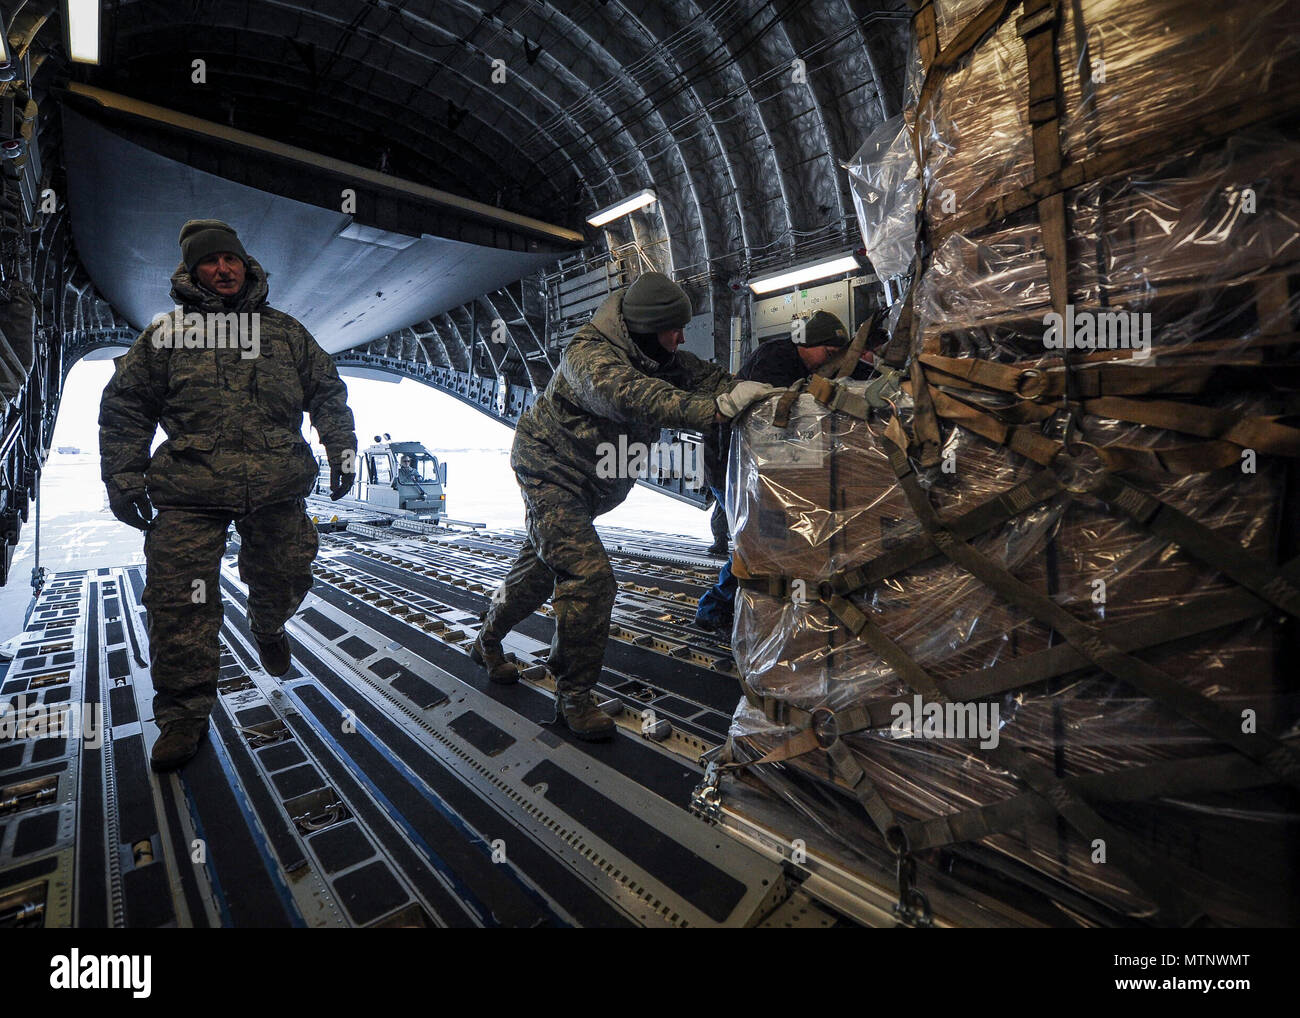 934th Airlift Wing Airmen at Minneapolis-St. Paul Air Reserve Station load humanitarian cargo onto a Joint Base Charleston C-17 Globemaster III Jan. 13, 2017. The 315th Airlift Wing flew more than 50,000 pounds of donated meals intended for refugees in northern Iraq. (U.S. Air Force photo by Senior Airman Tom Brading) Stock Photo